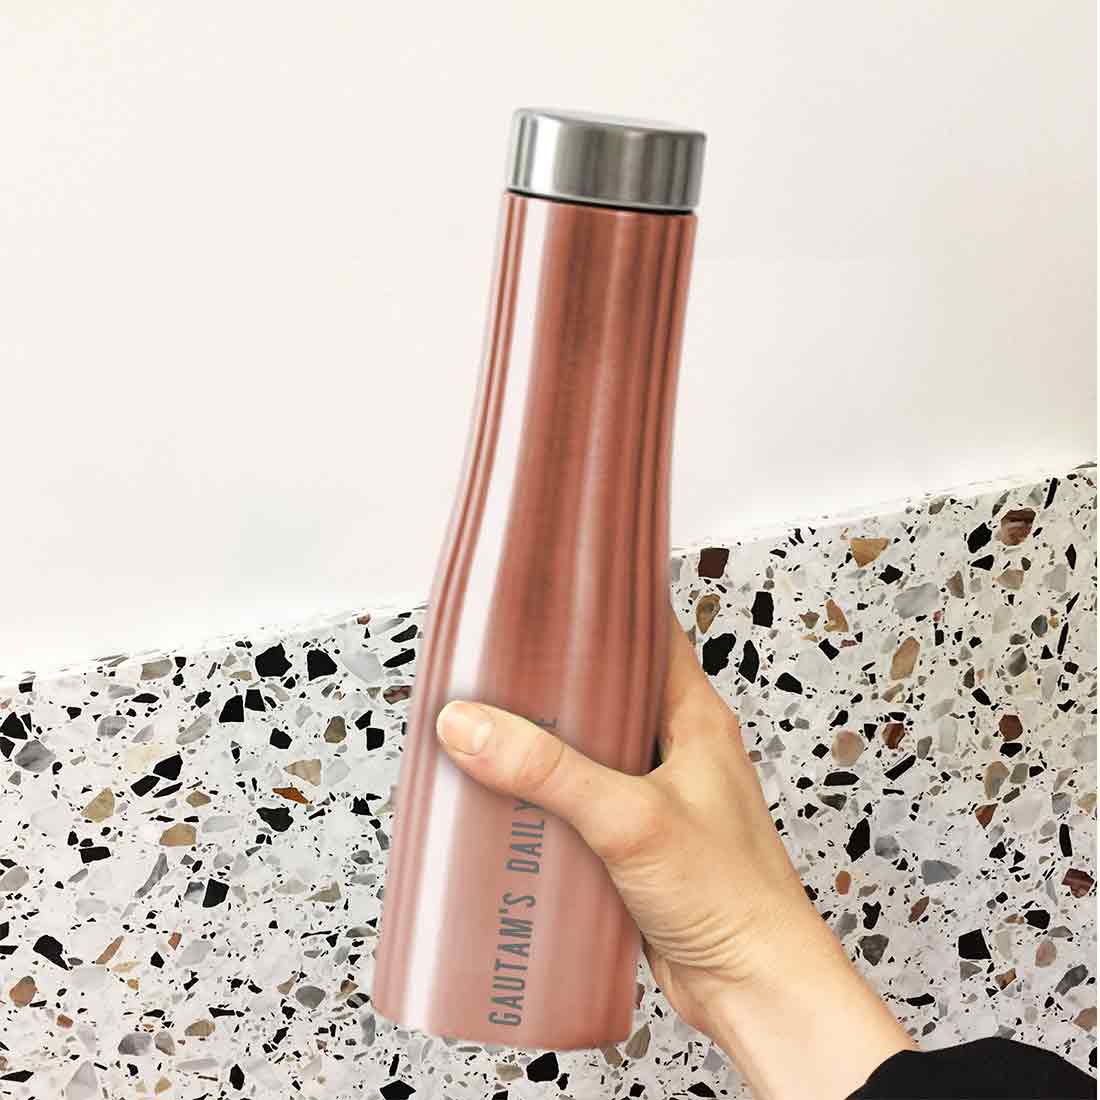 Printed Steel Water Bottle for Home Office Restaurant Cafes-Rose Gold 750ml